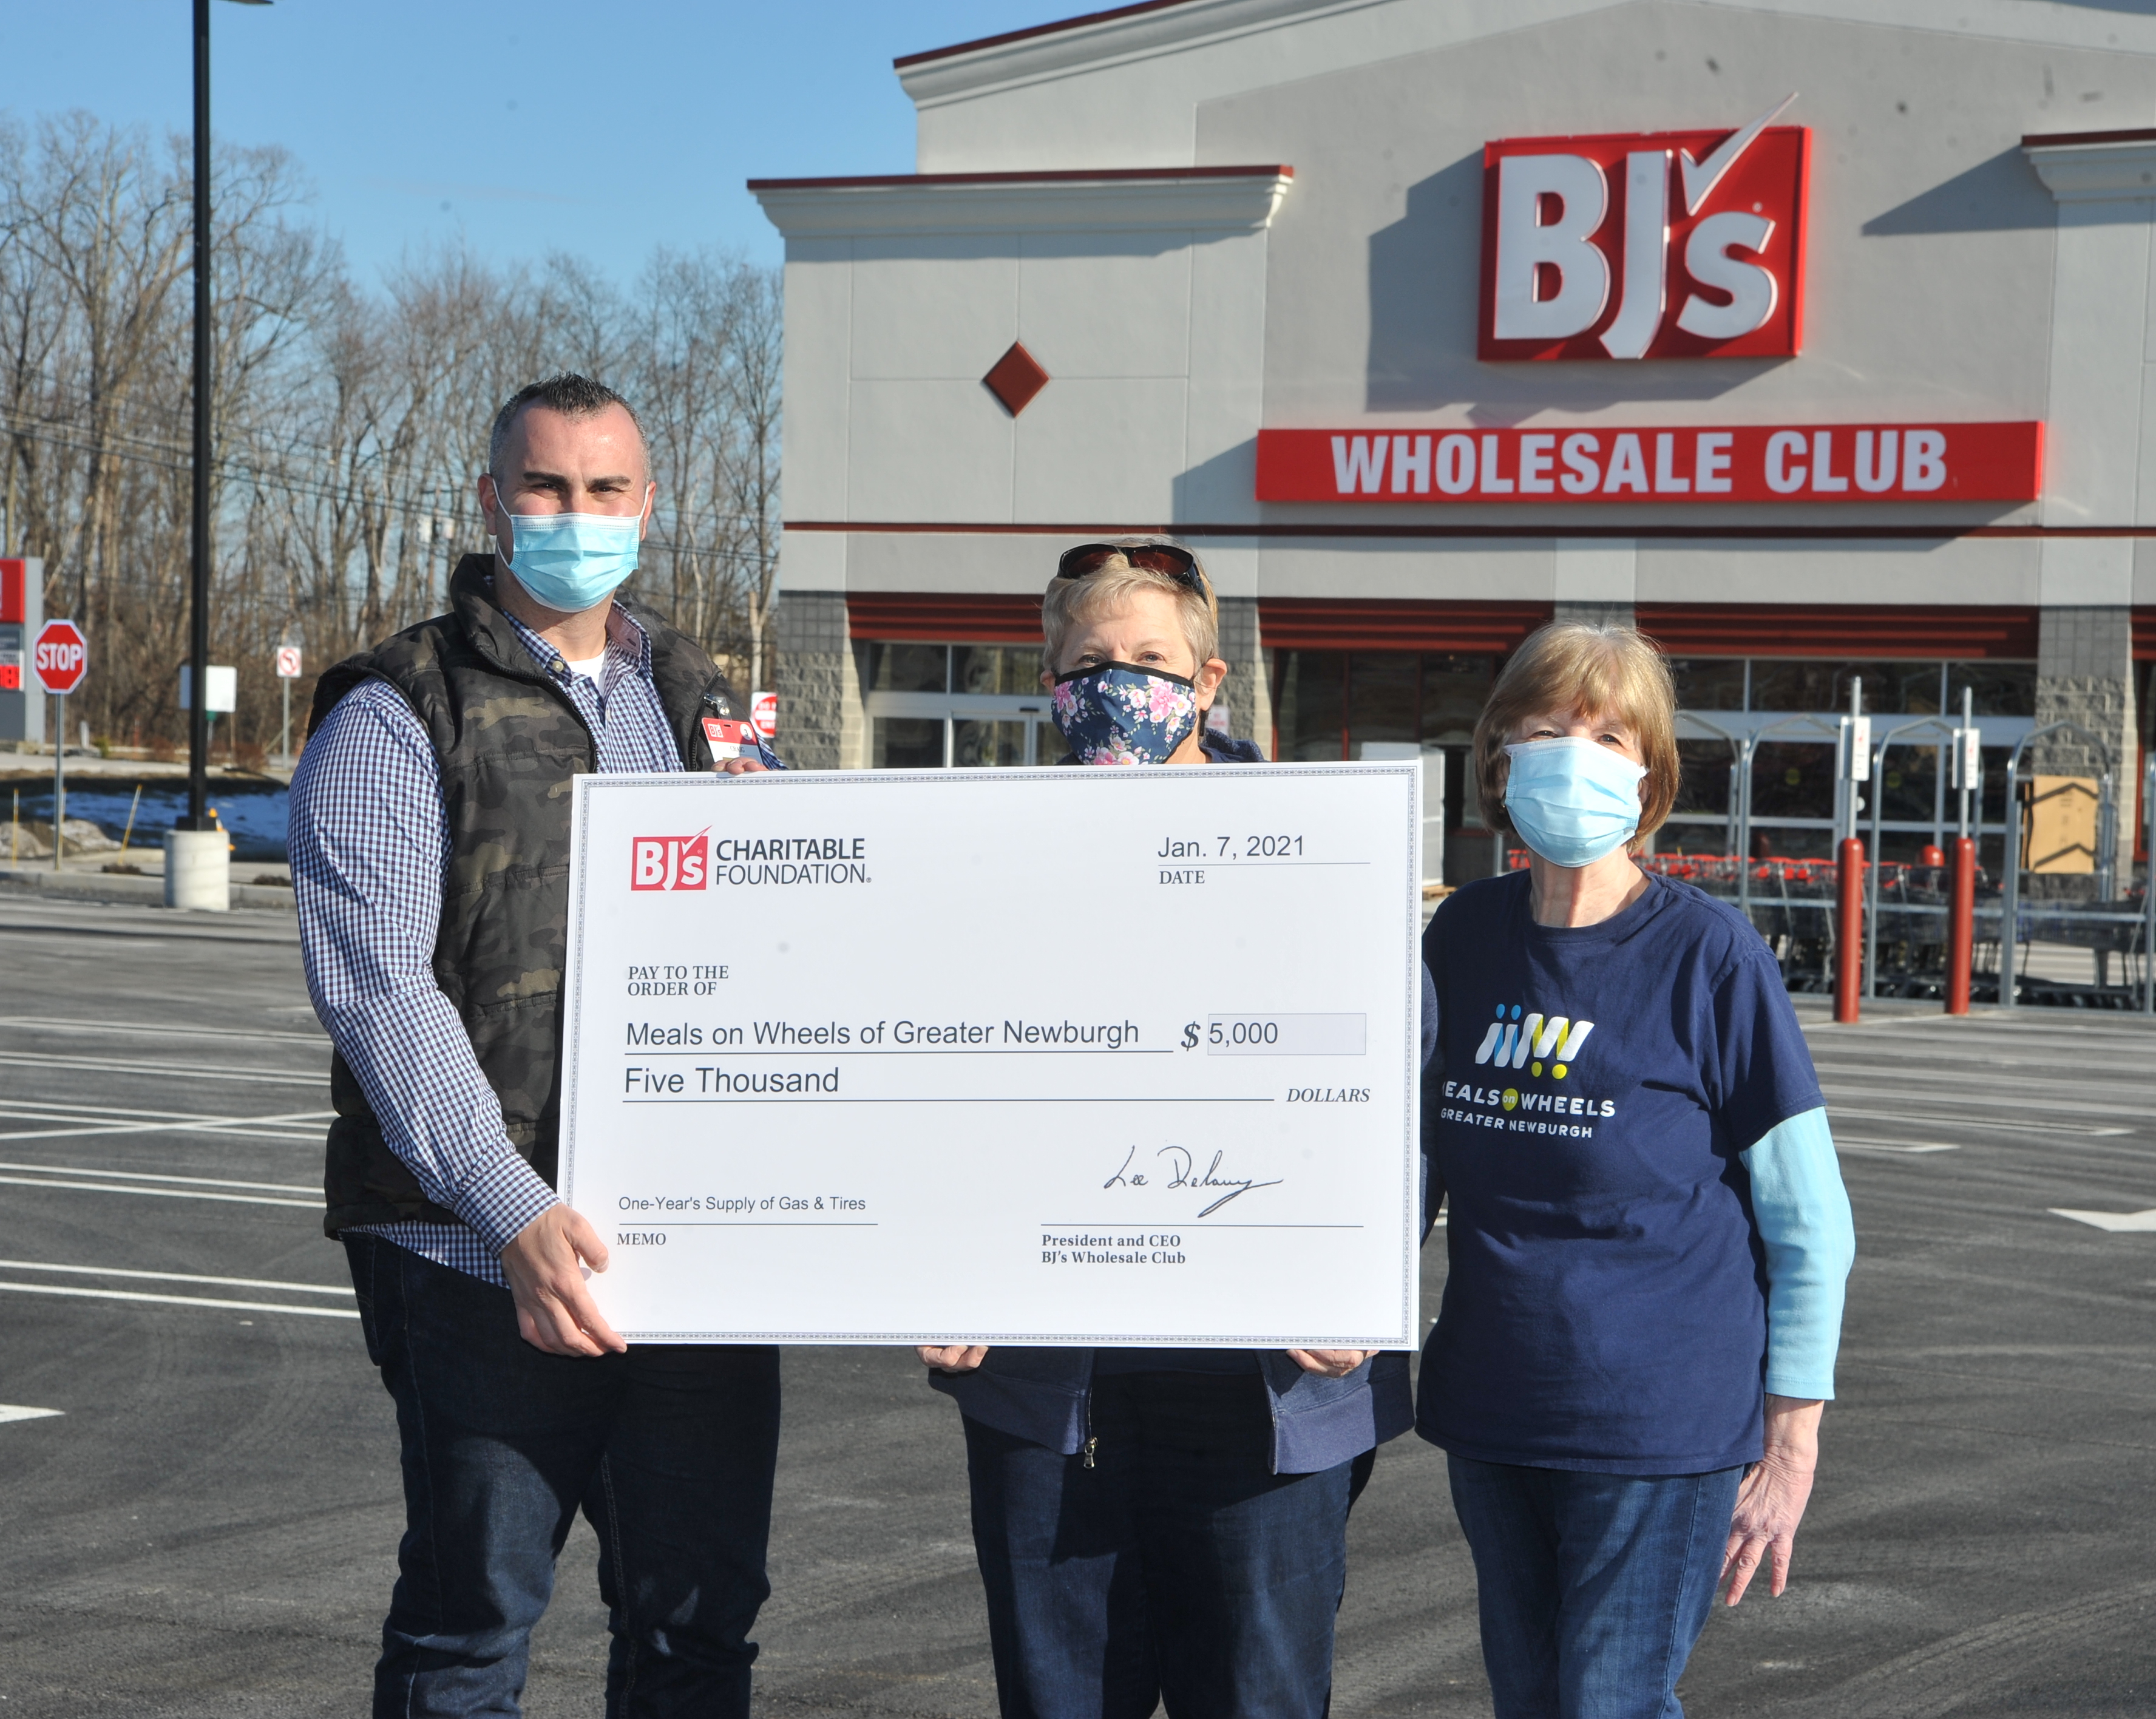 Bj S Wholesale Club Announces Opening Of Newest Bj S Gas In Newburgh N Y Business Wire